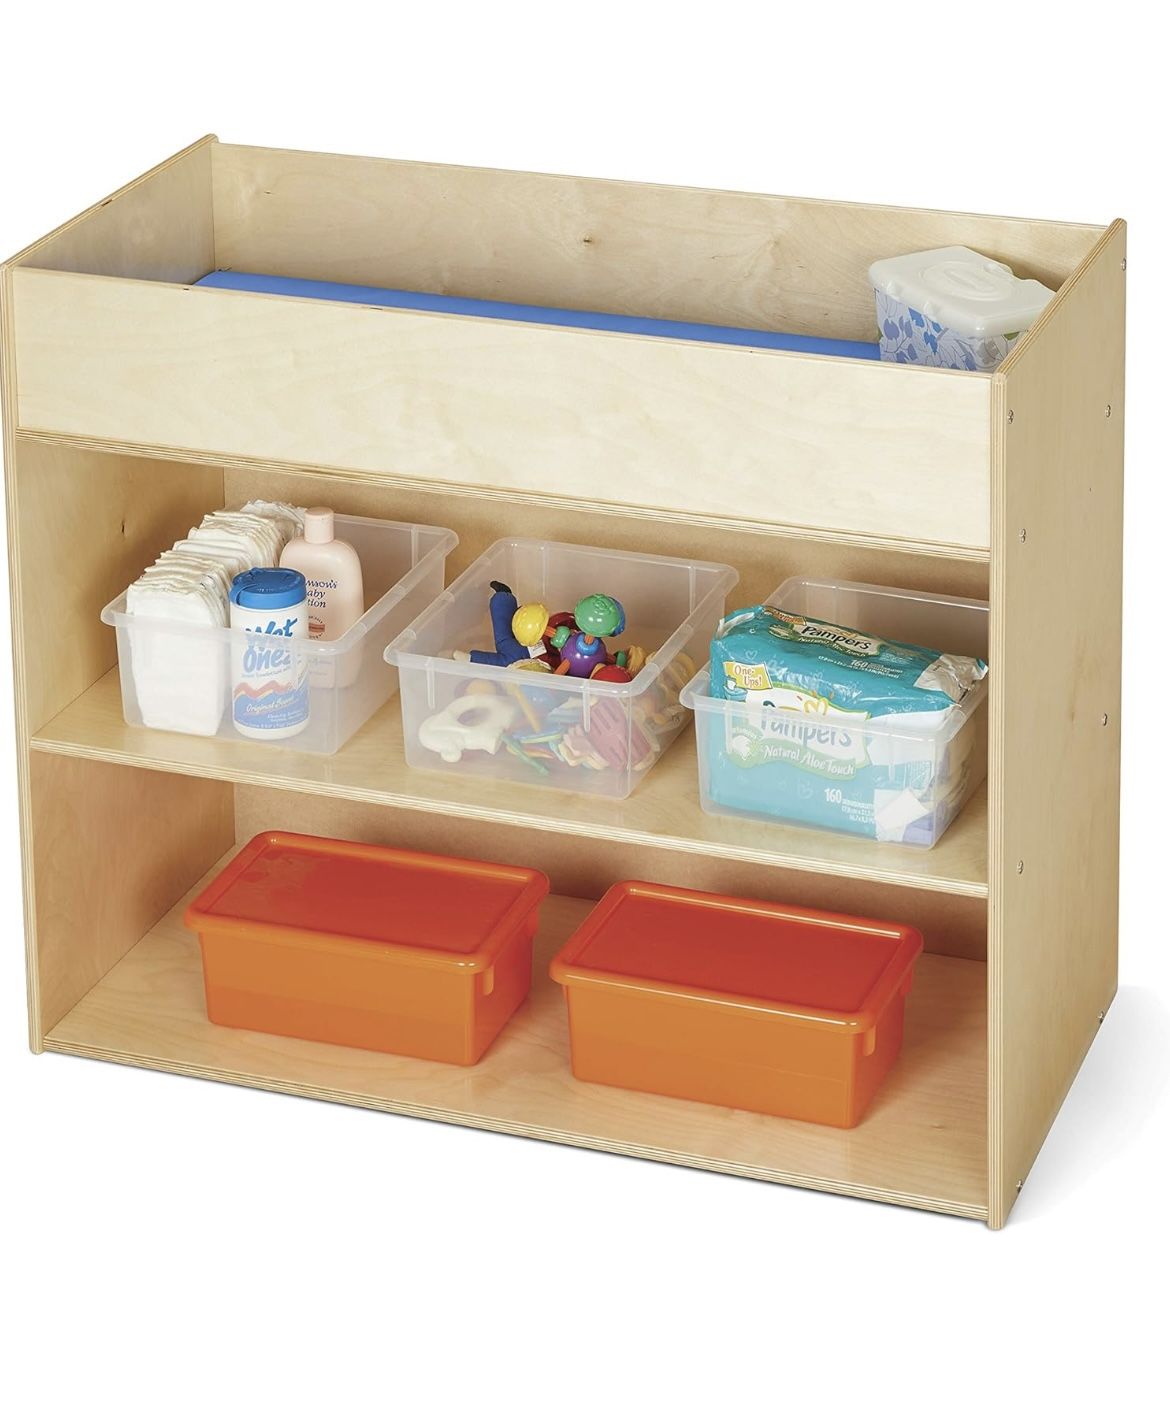 B-135 Jonti-Craft YoungTime 7144YT Changing Table